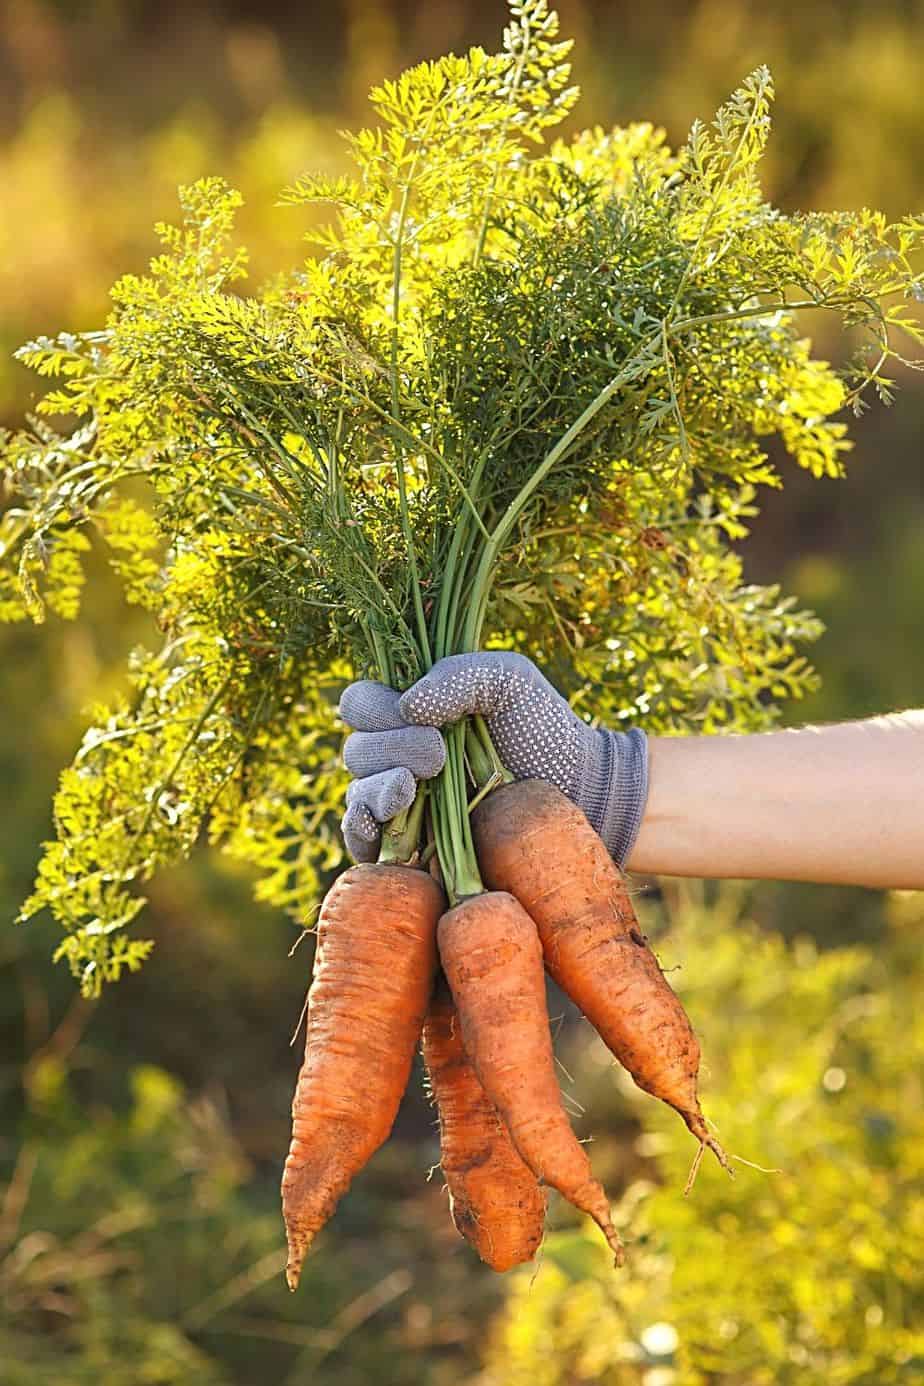 Carrots are best grown in raised vegetables to avoid carrot flies from infesting them